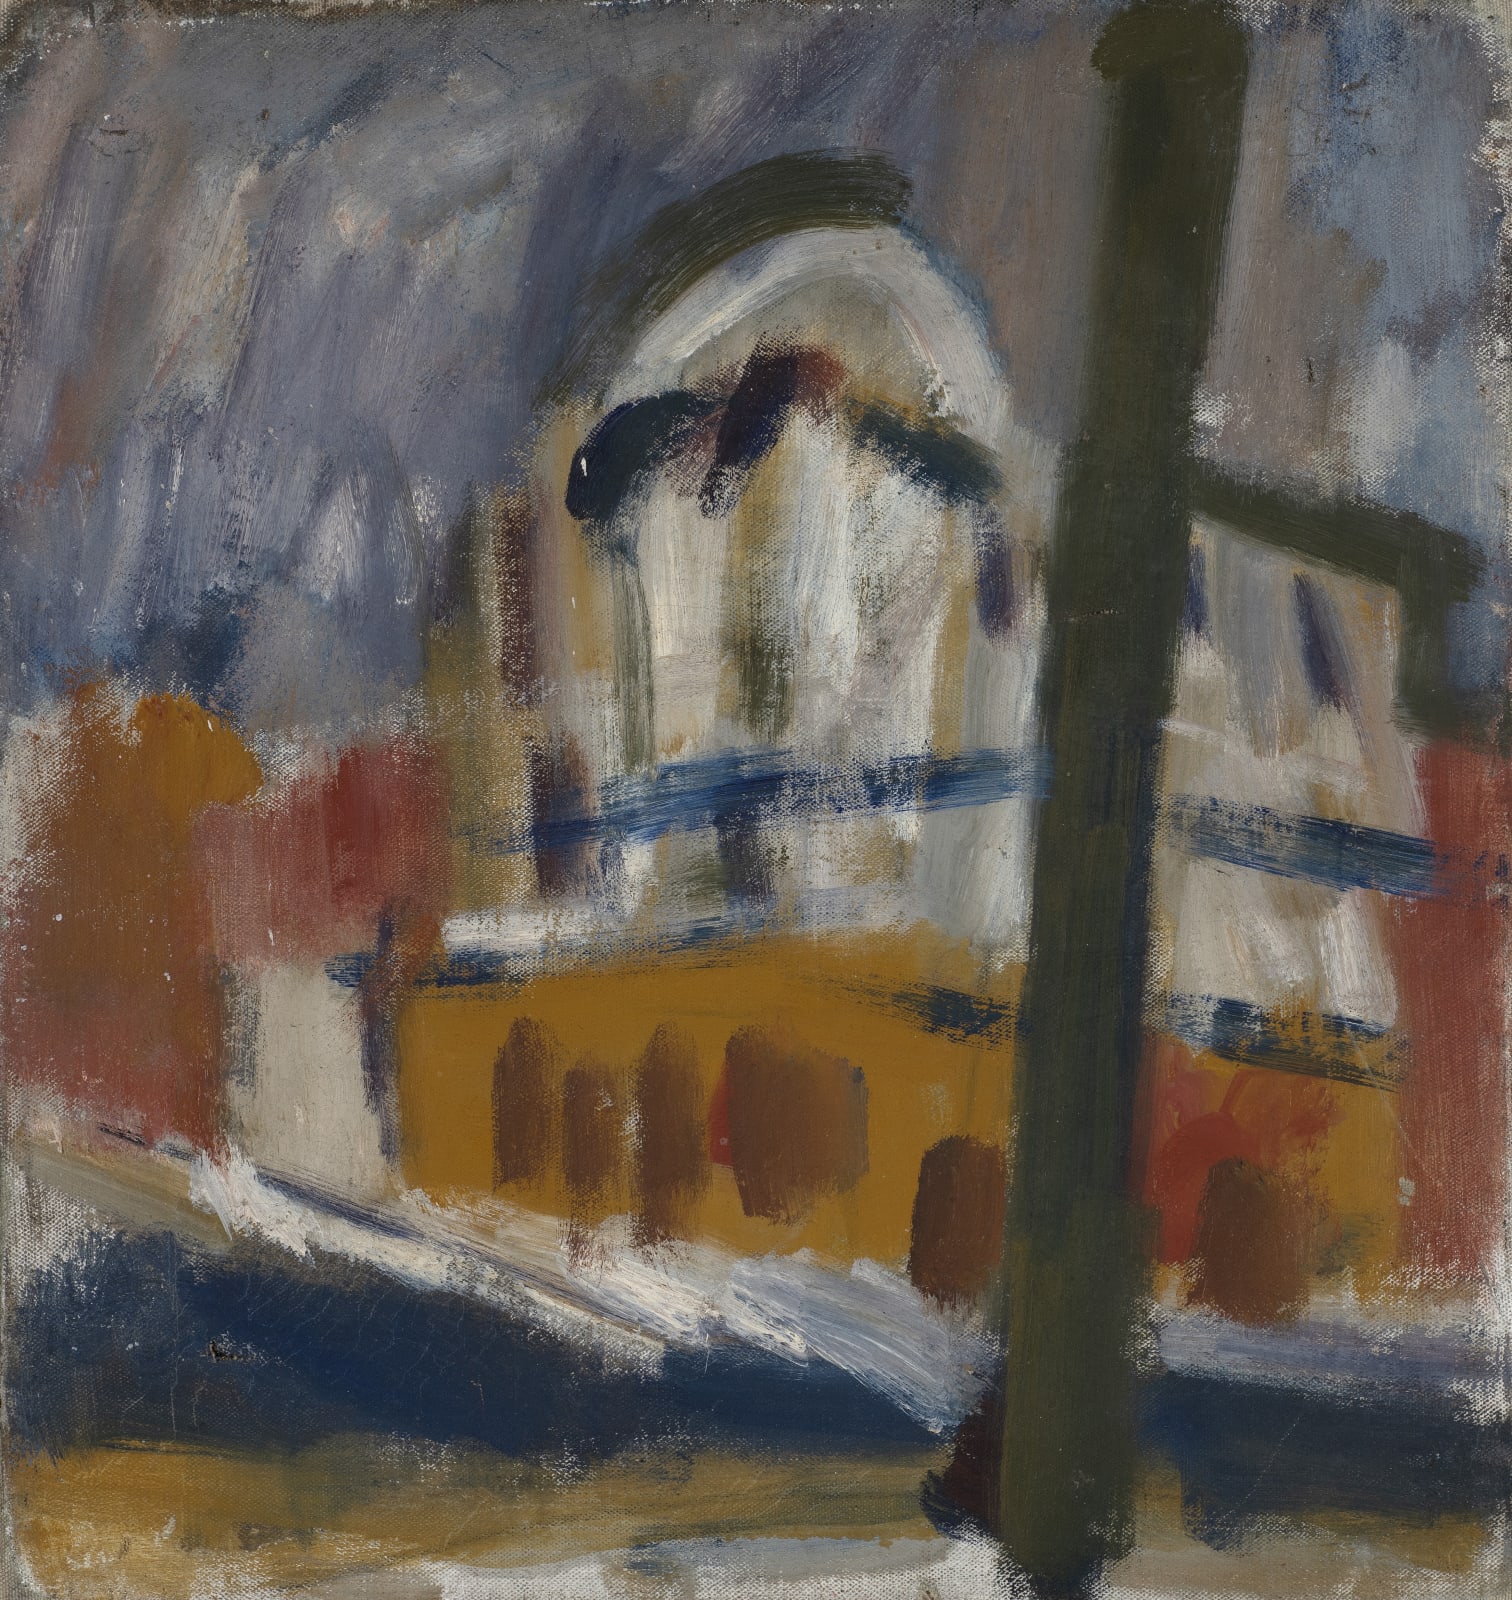 Building, c. 1949-53 Oil on canvas 43 x 40cm The Gustav Metzger Foundation